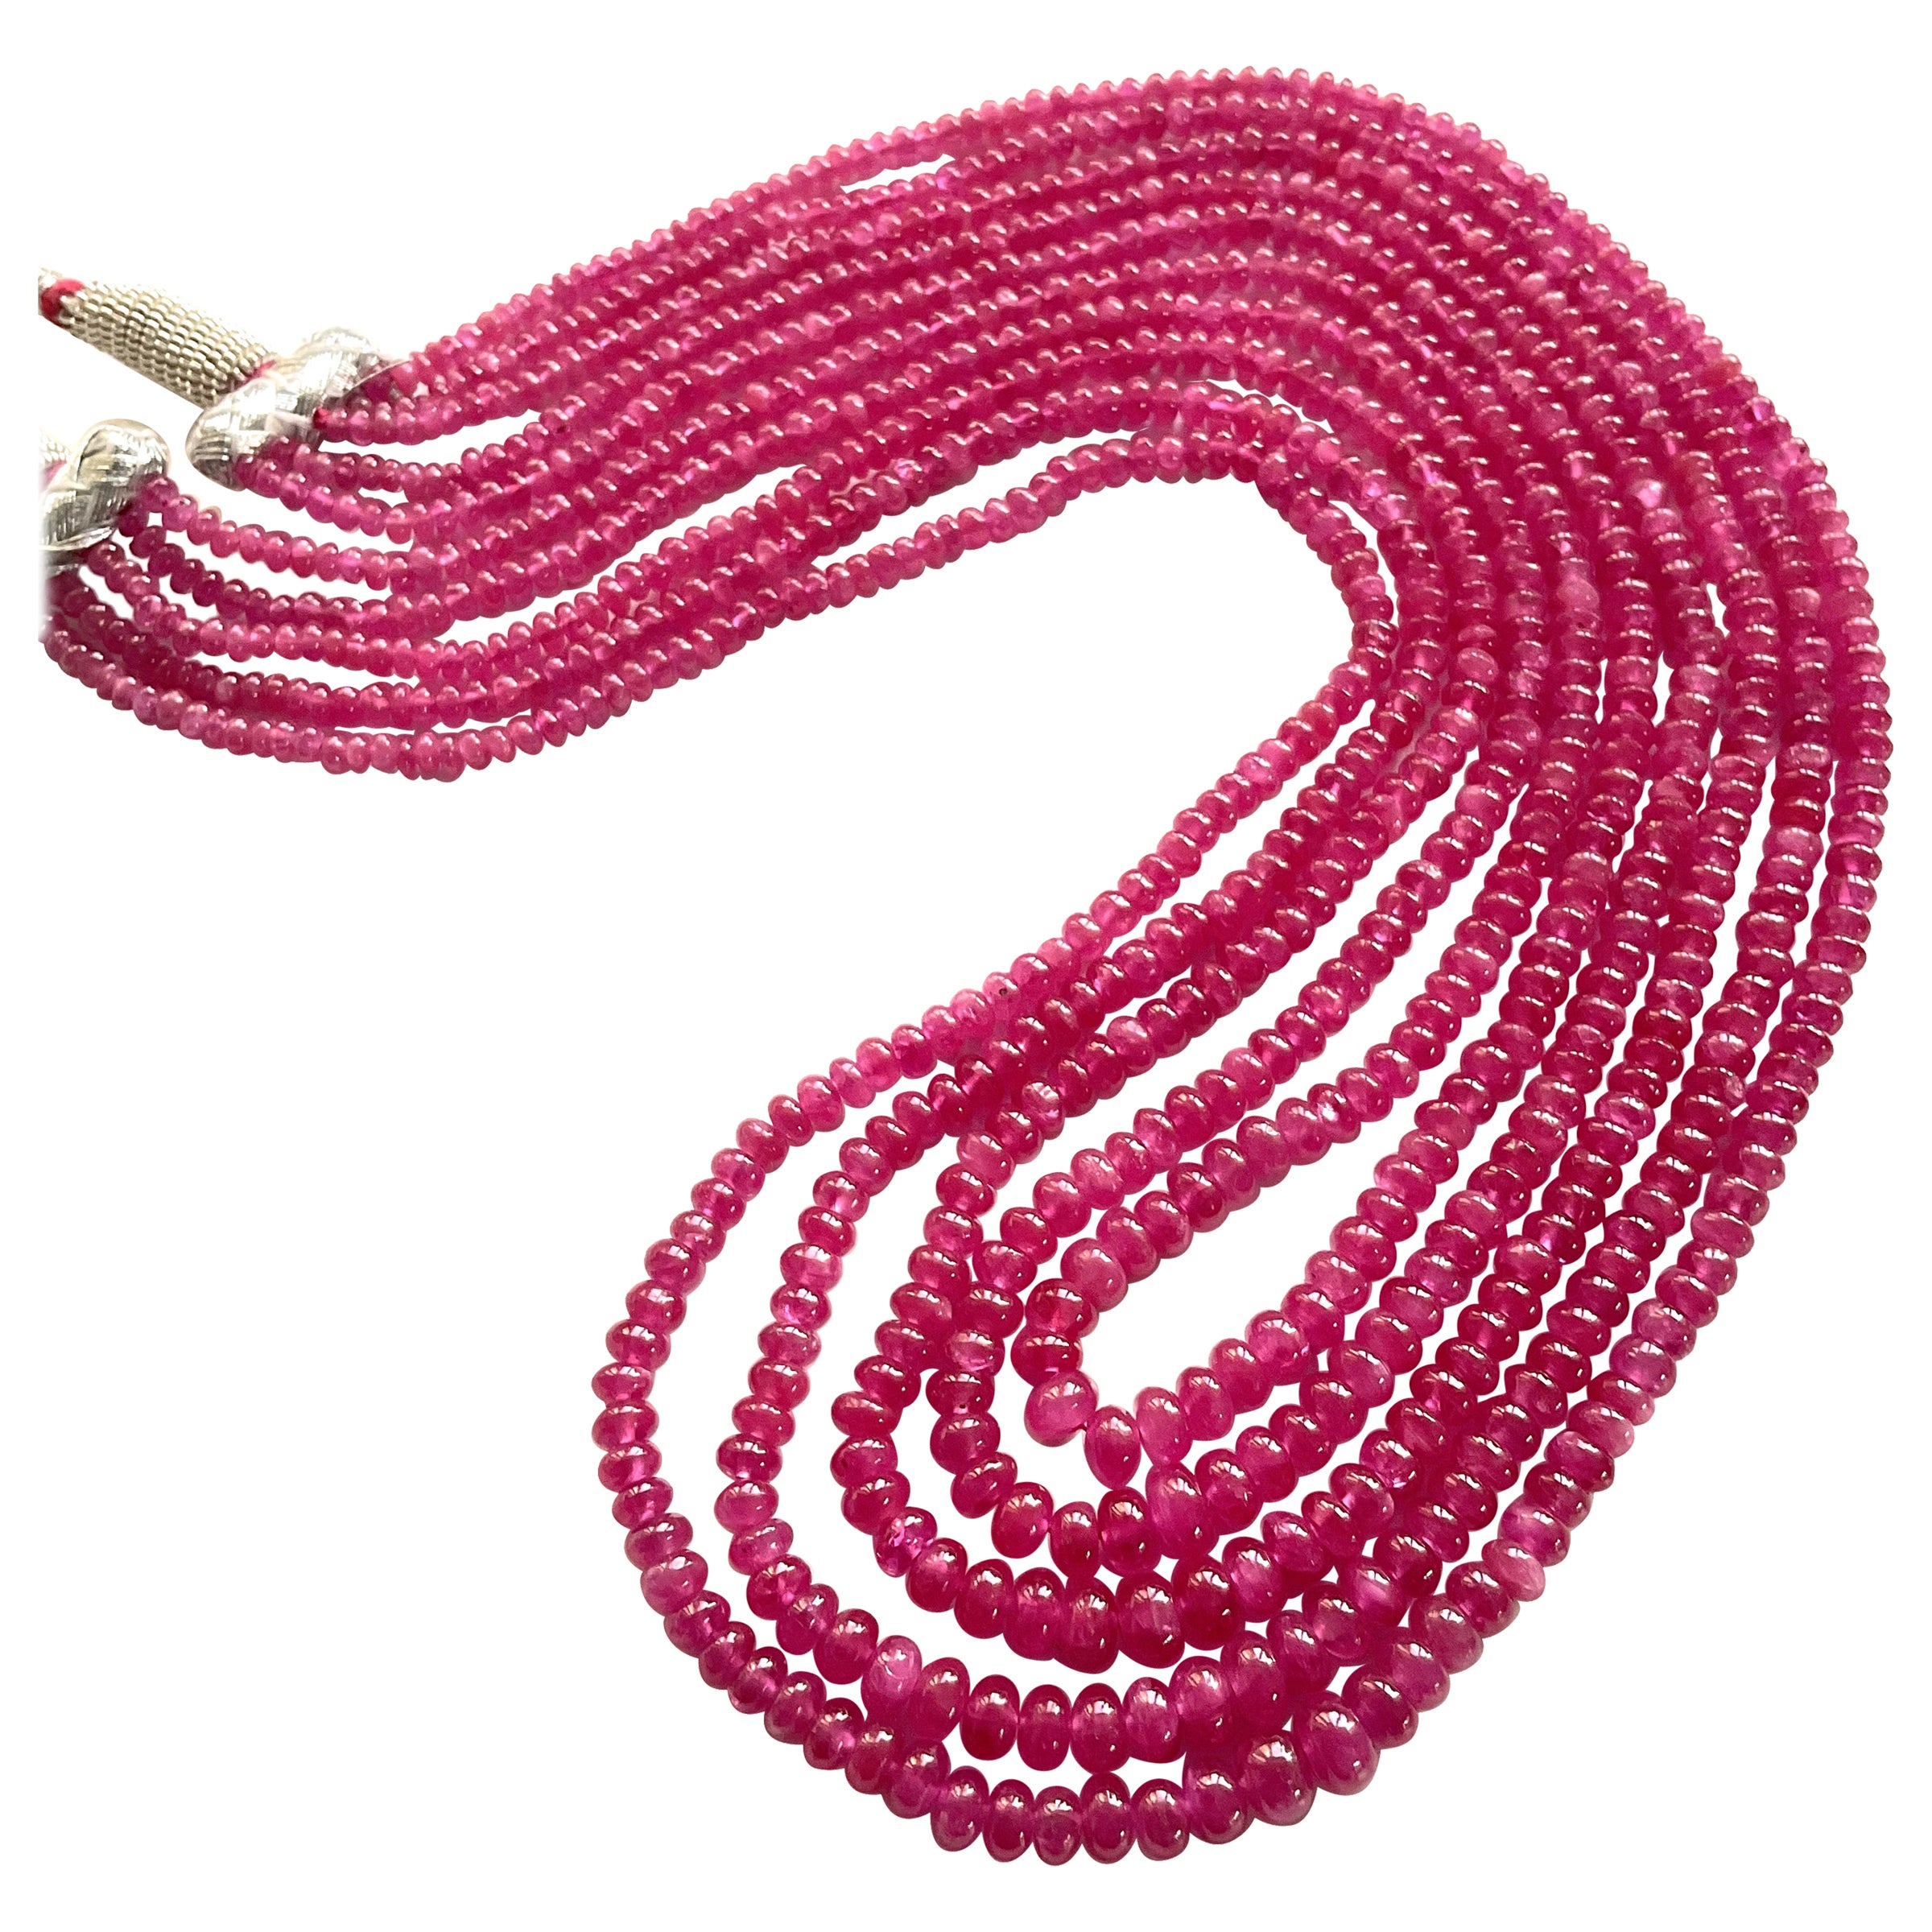 306.45 Carats Johnson Ruby Plain Beaded Necklace Top Quality Natural Gemstone